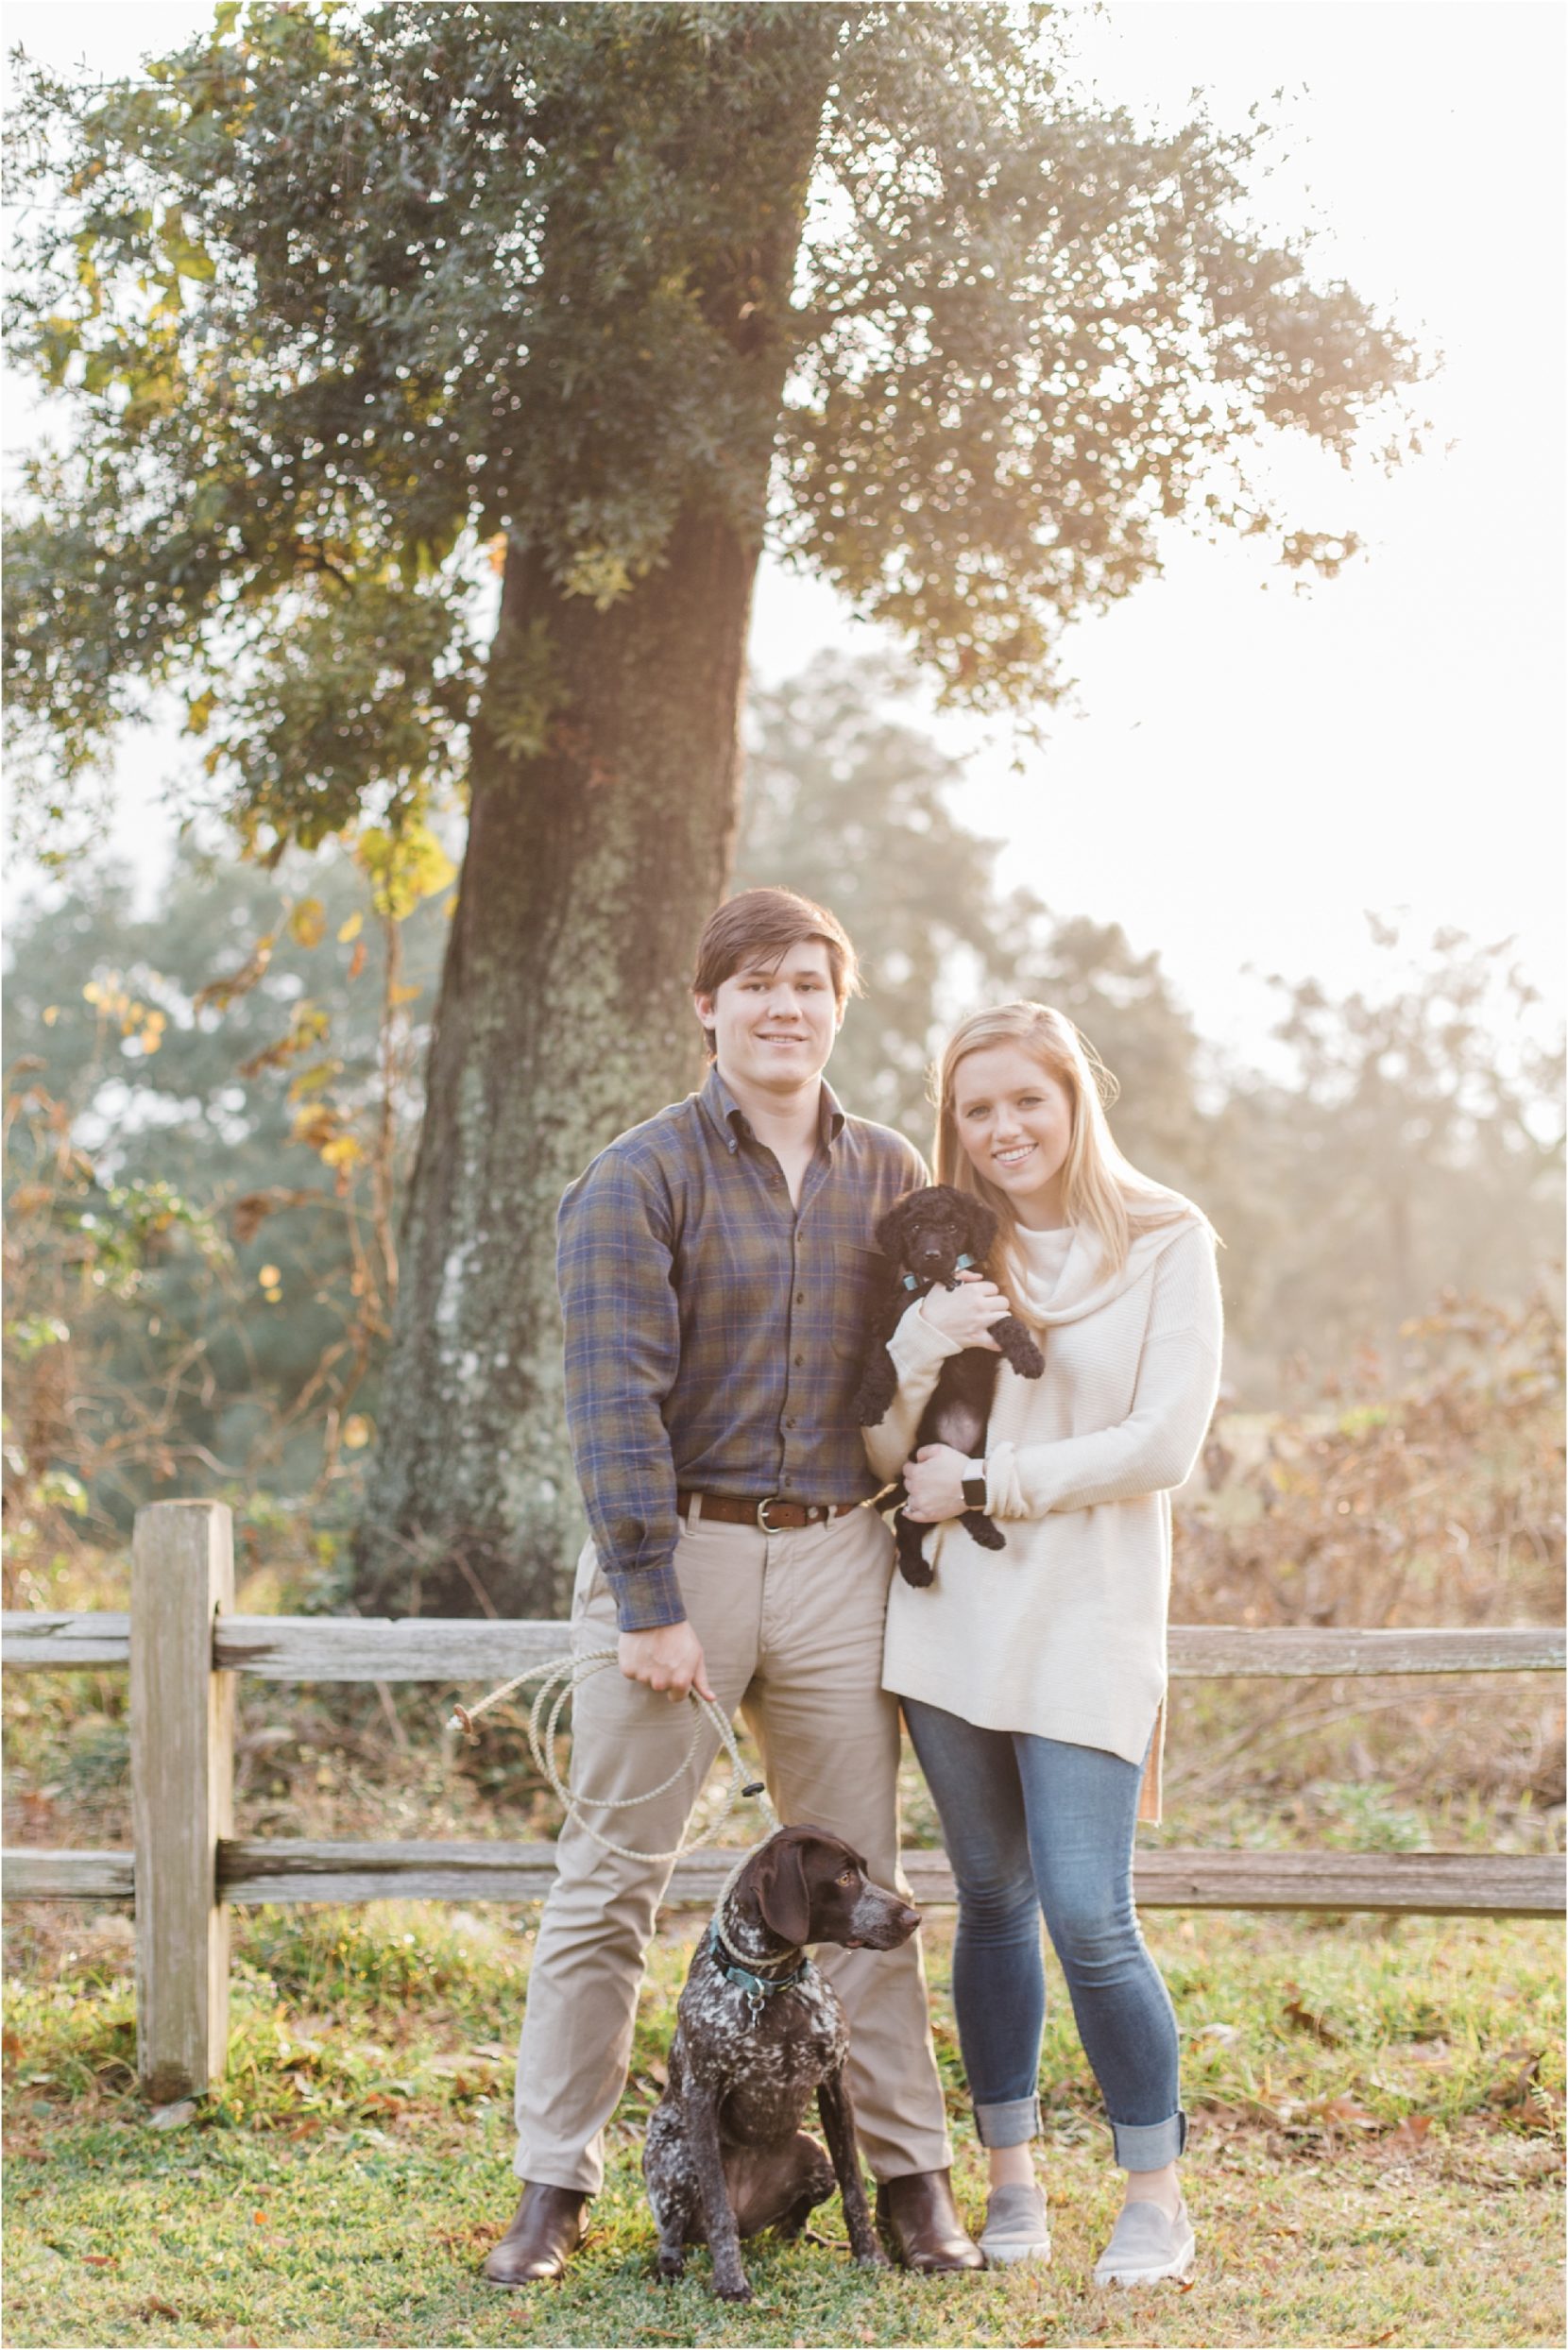 mobile alabama springhill college engagement photographer jennie tewell photography 0014